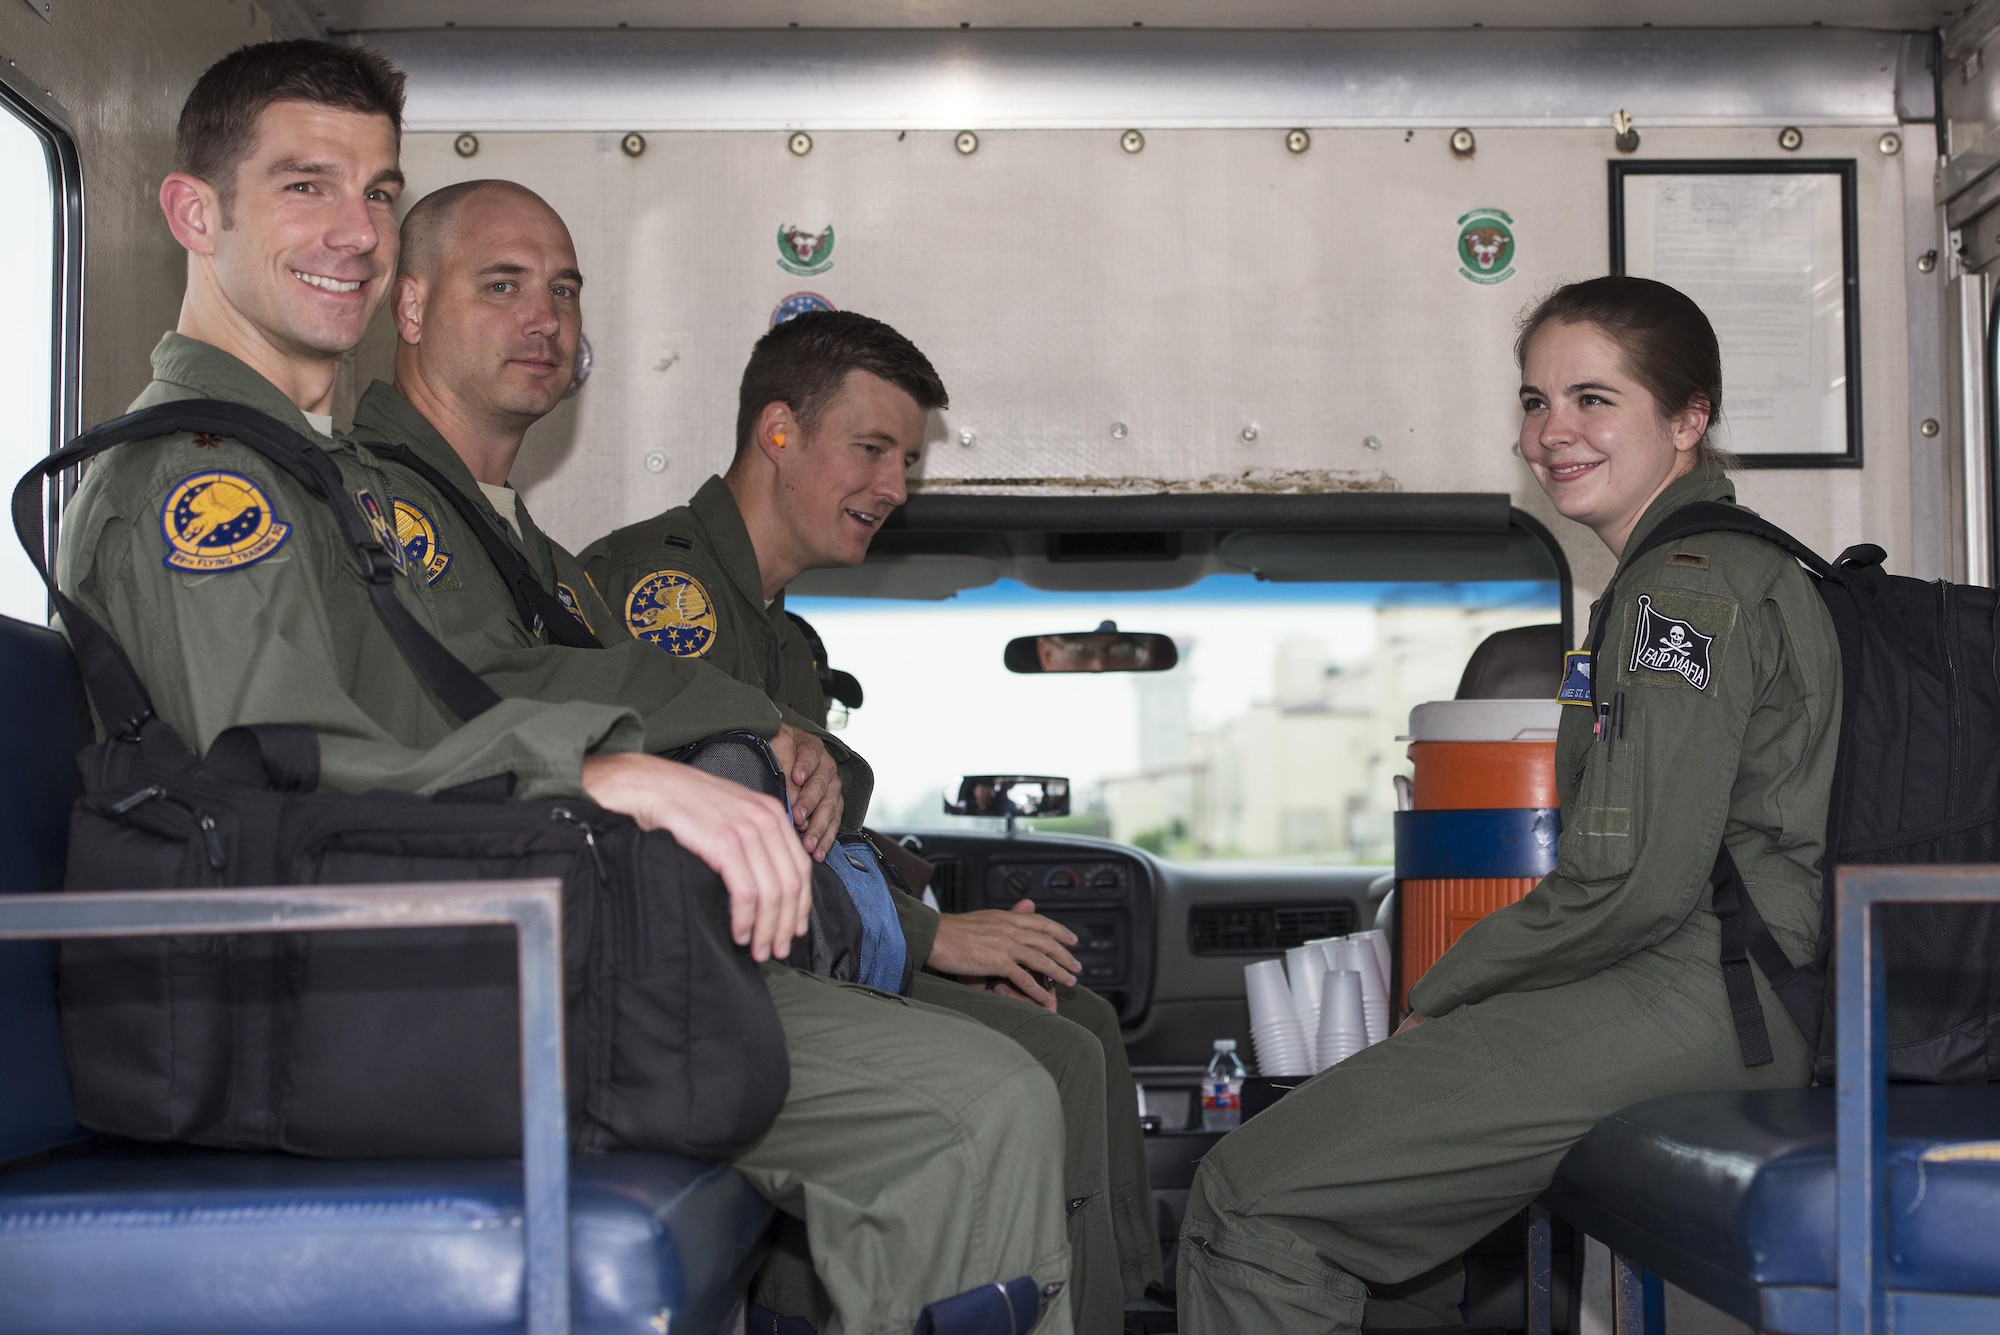 Left to right: Maj. Ryan Scott, 99th Flying Training Squadron “A” flight commander and T-1A Jayhawk instructor pilot, Maj. Brian Boettger, 99th FTS T-1A instructor pilot, Capt. Brad Davis, 99th FTS instructor pilot trainee and 2nd Lt. Aimee St. Cyr, 99th FTS instructor pilot trainee, are transported to their aircraft on the flightline of Joint Base San Antonio-Randolph May 12, 2016. This year marks the 23rd anniversary of the 99th FTS using the T-1A to train instructor pilots at JBSA-Randolph.